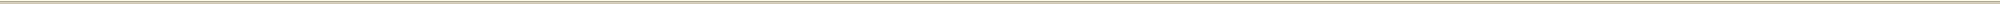 Gold-line-2000wide_2x.png